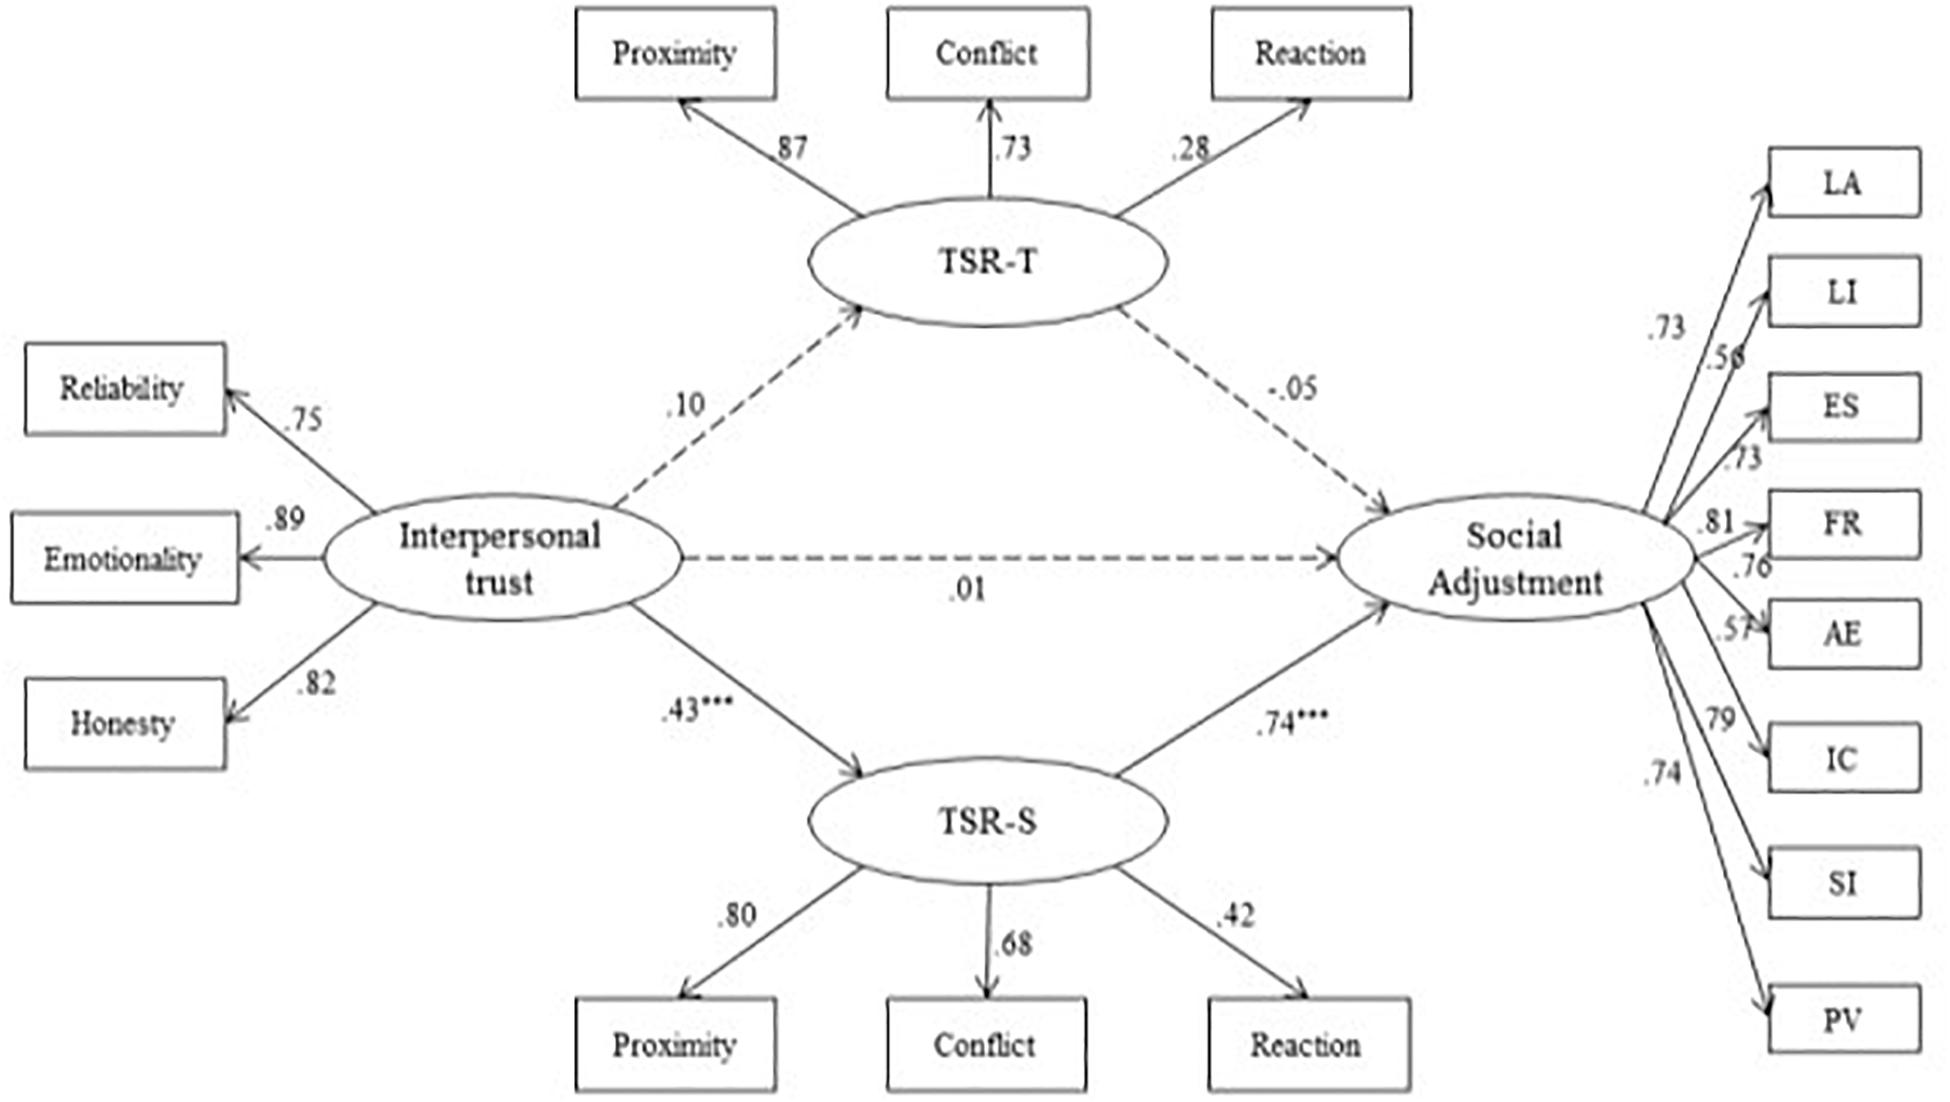 Frontiers | How Children Feel Matters: Teacherâ€“Student Relationship as an  Indirect Role Between Interpersonal Trust and Social Adjustment